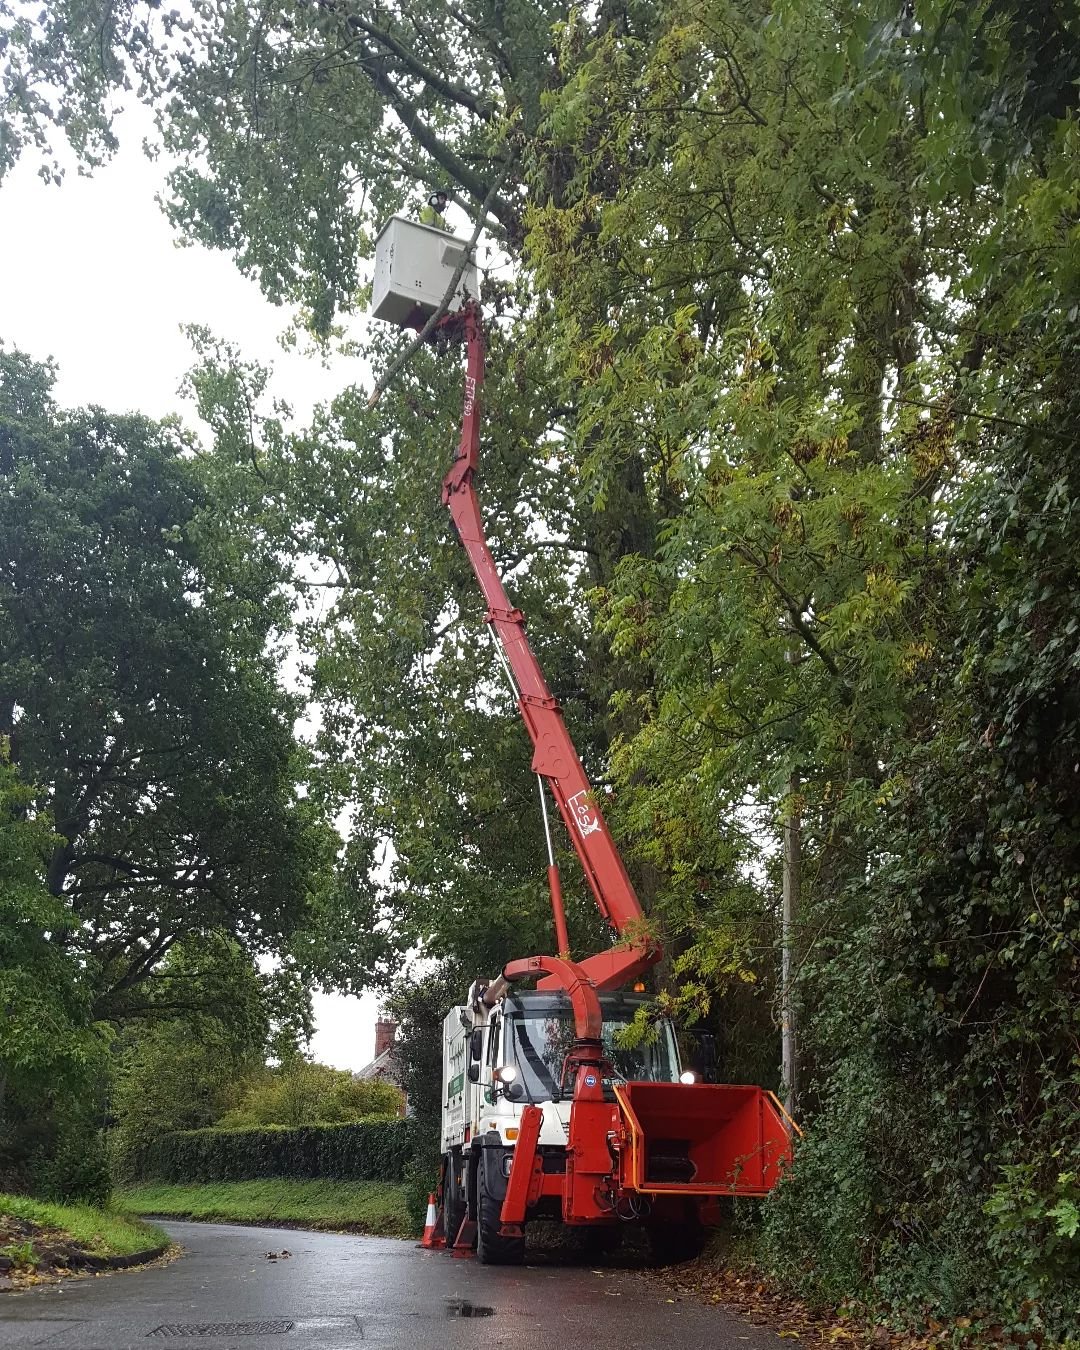 Call out from a concerned tree owner client in wickham yesterday morning hanging  snapped limb removed with ease